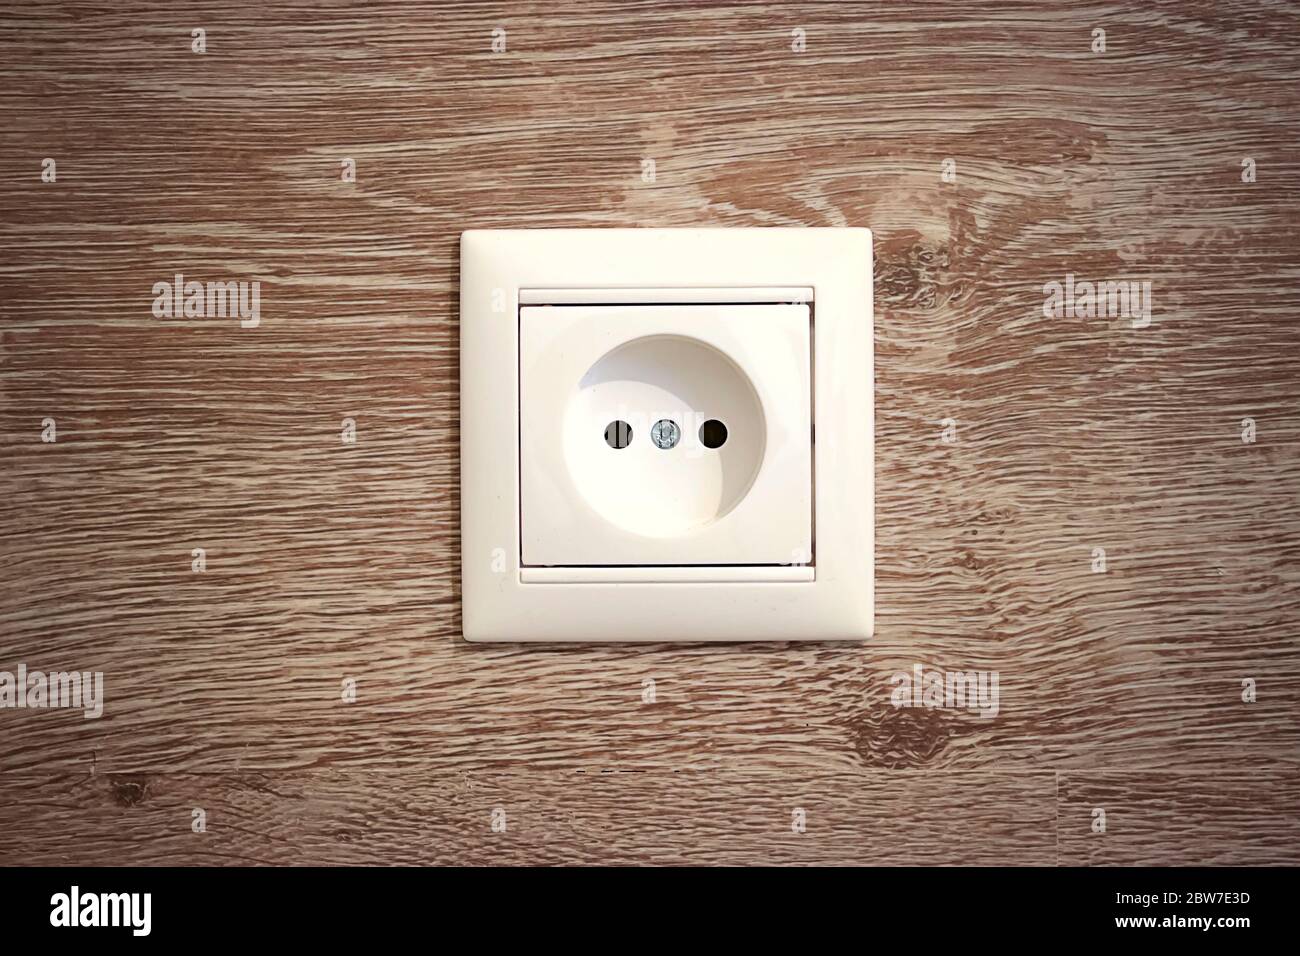 White european electrical outlet on a wood wall background. Concept electricity and minimalism. Stock Photo